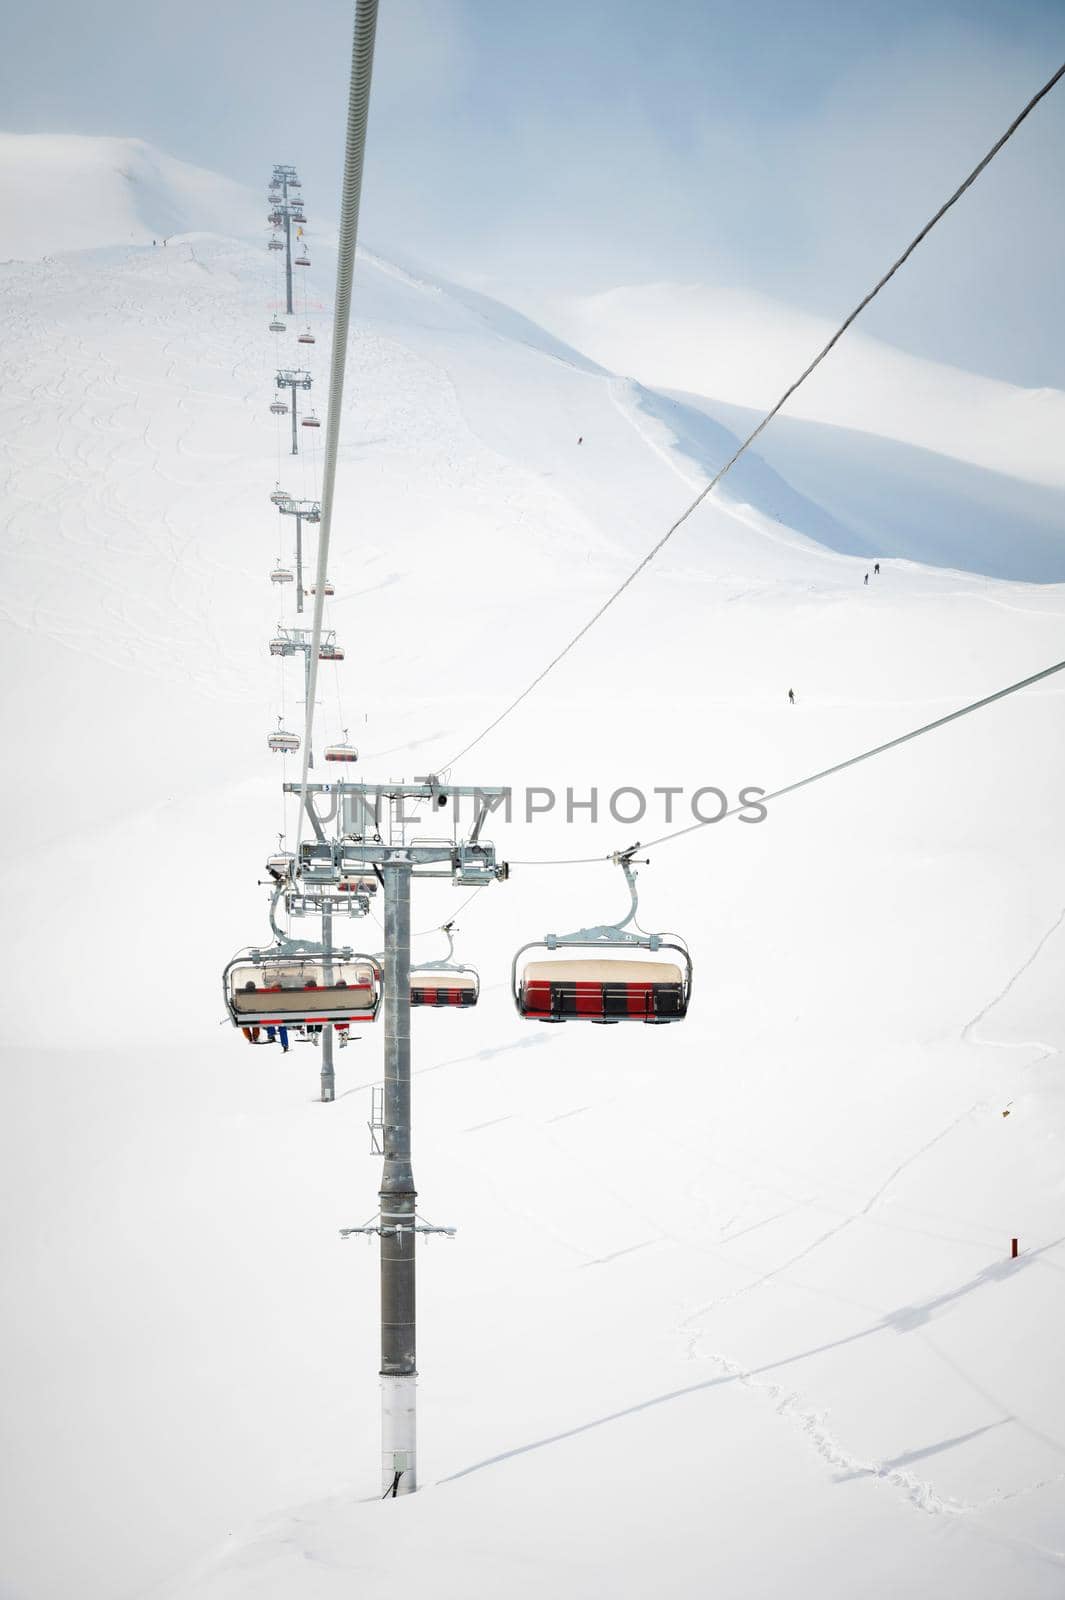 An open-air lift that goes to the top of the mountain for downhill skiing. Sunny day surrounded by snowy fields. Ski resort slope in good weather by yanik88